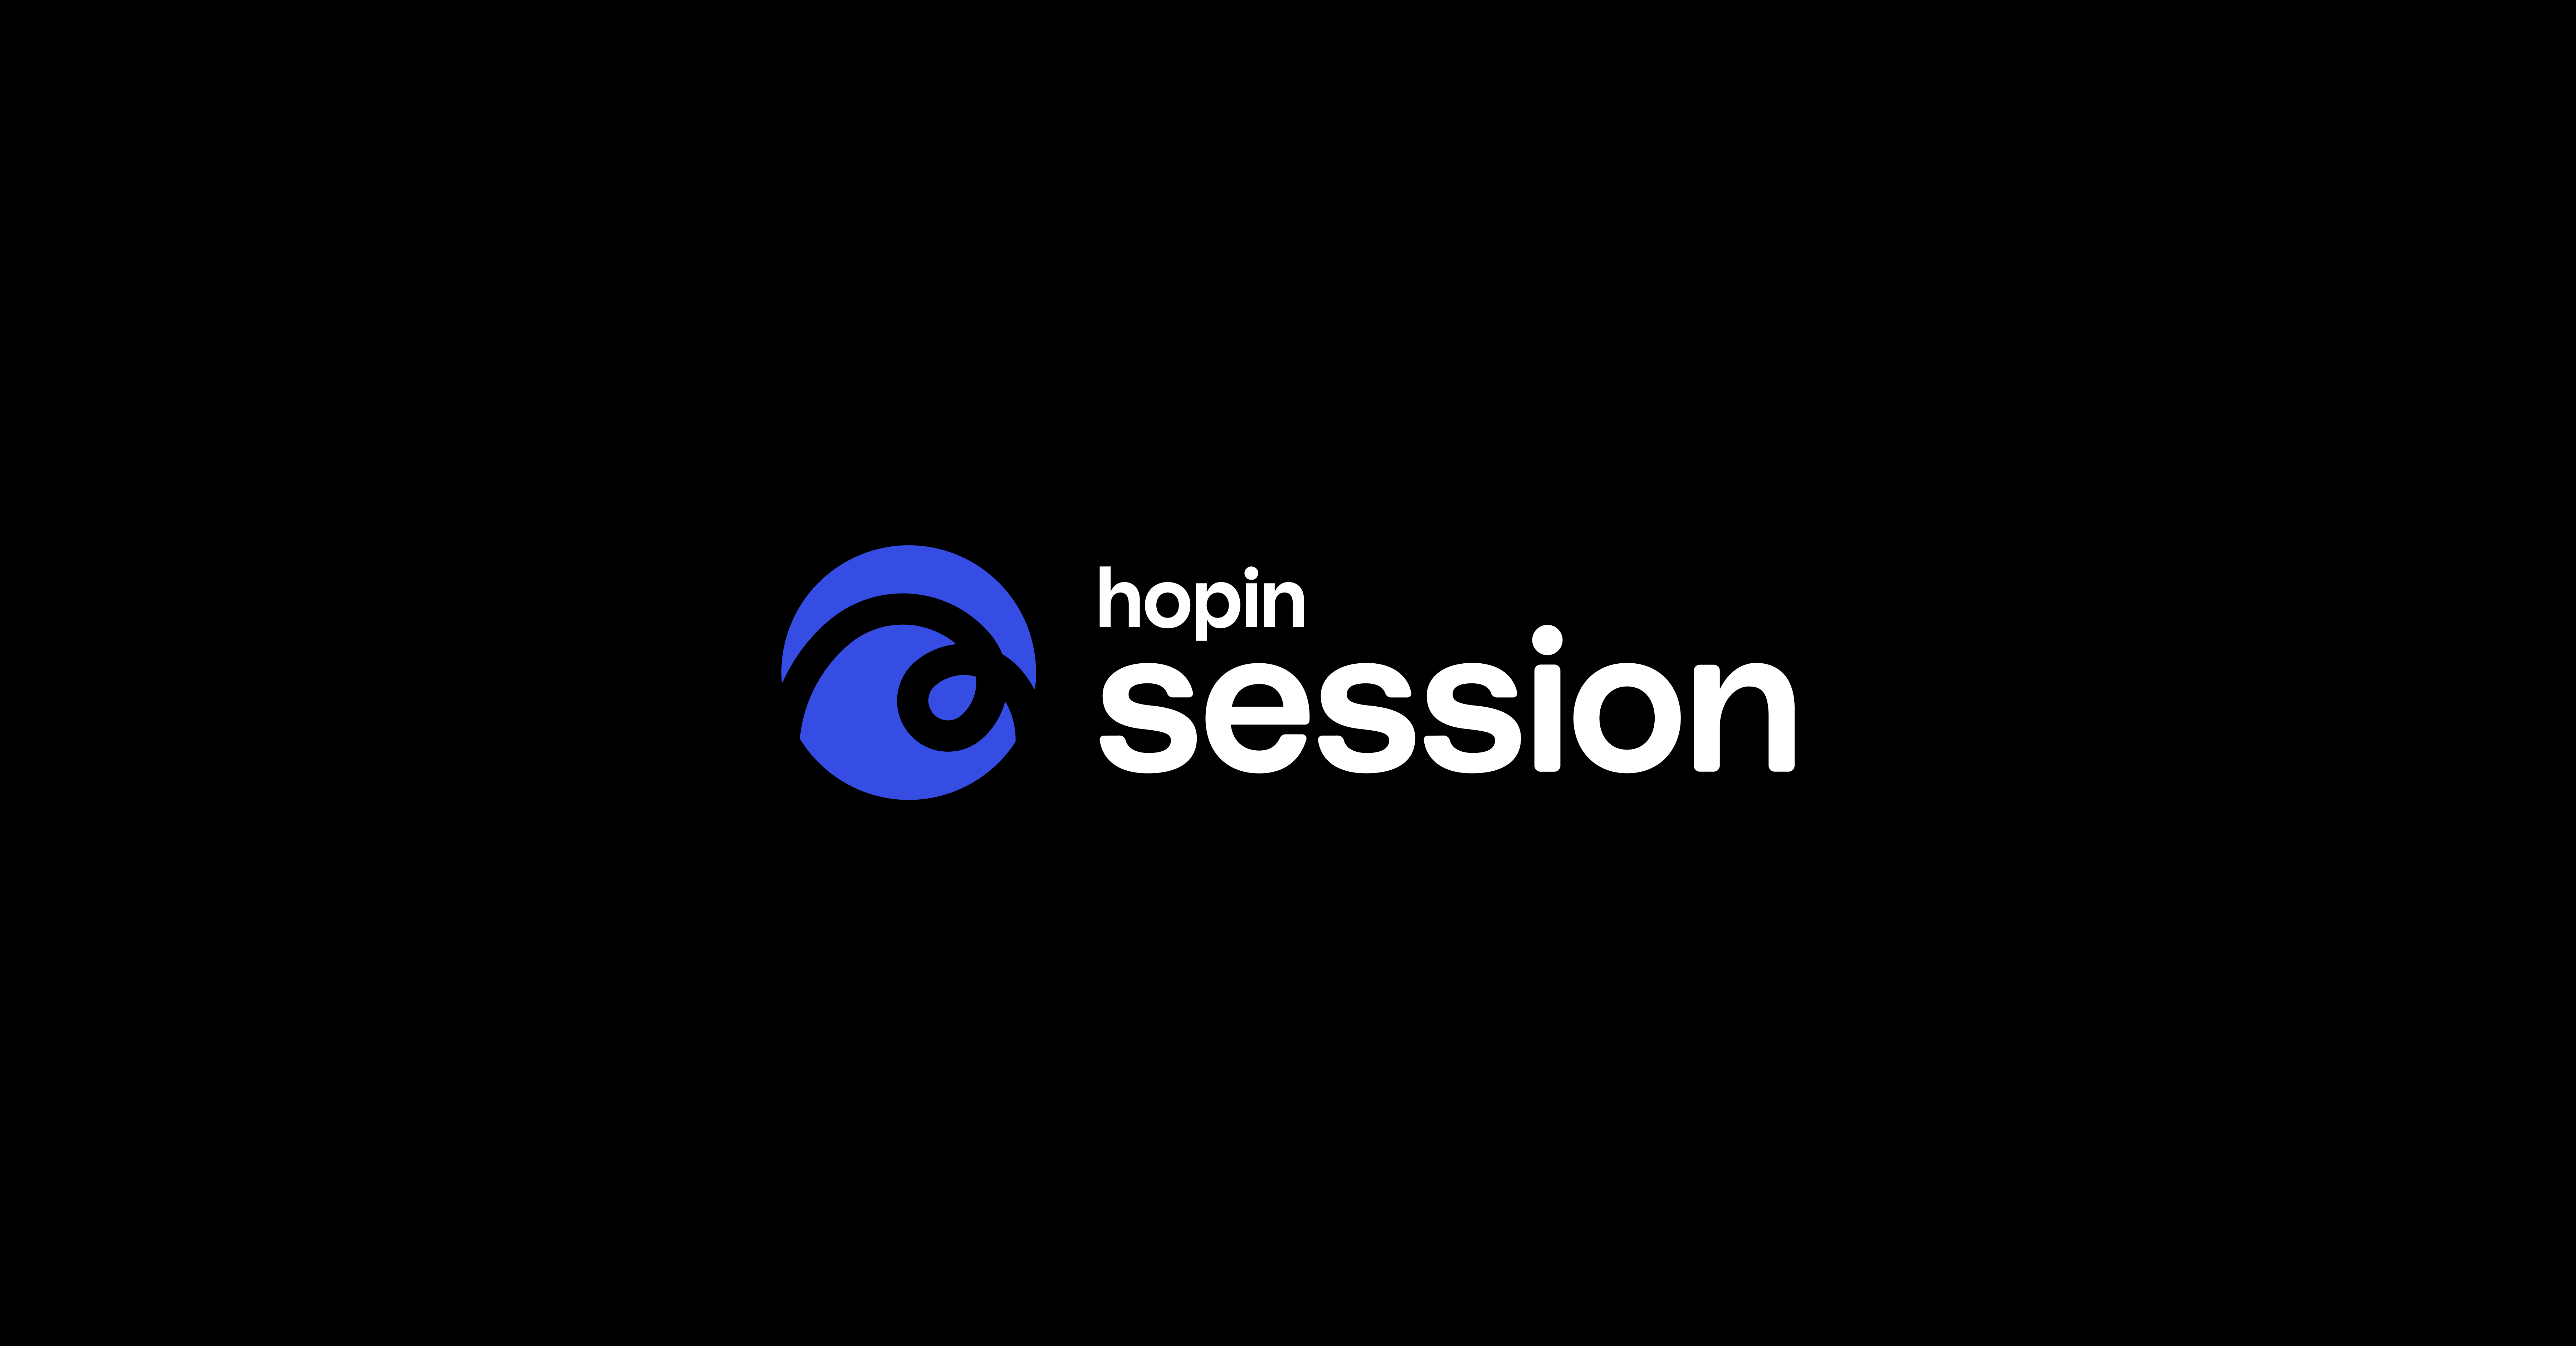 Introducing Hopin Session